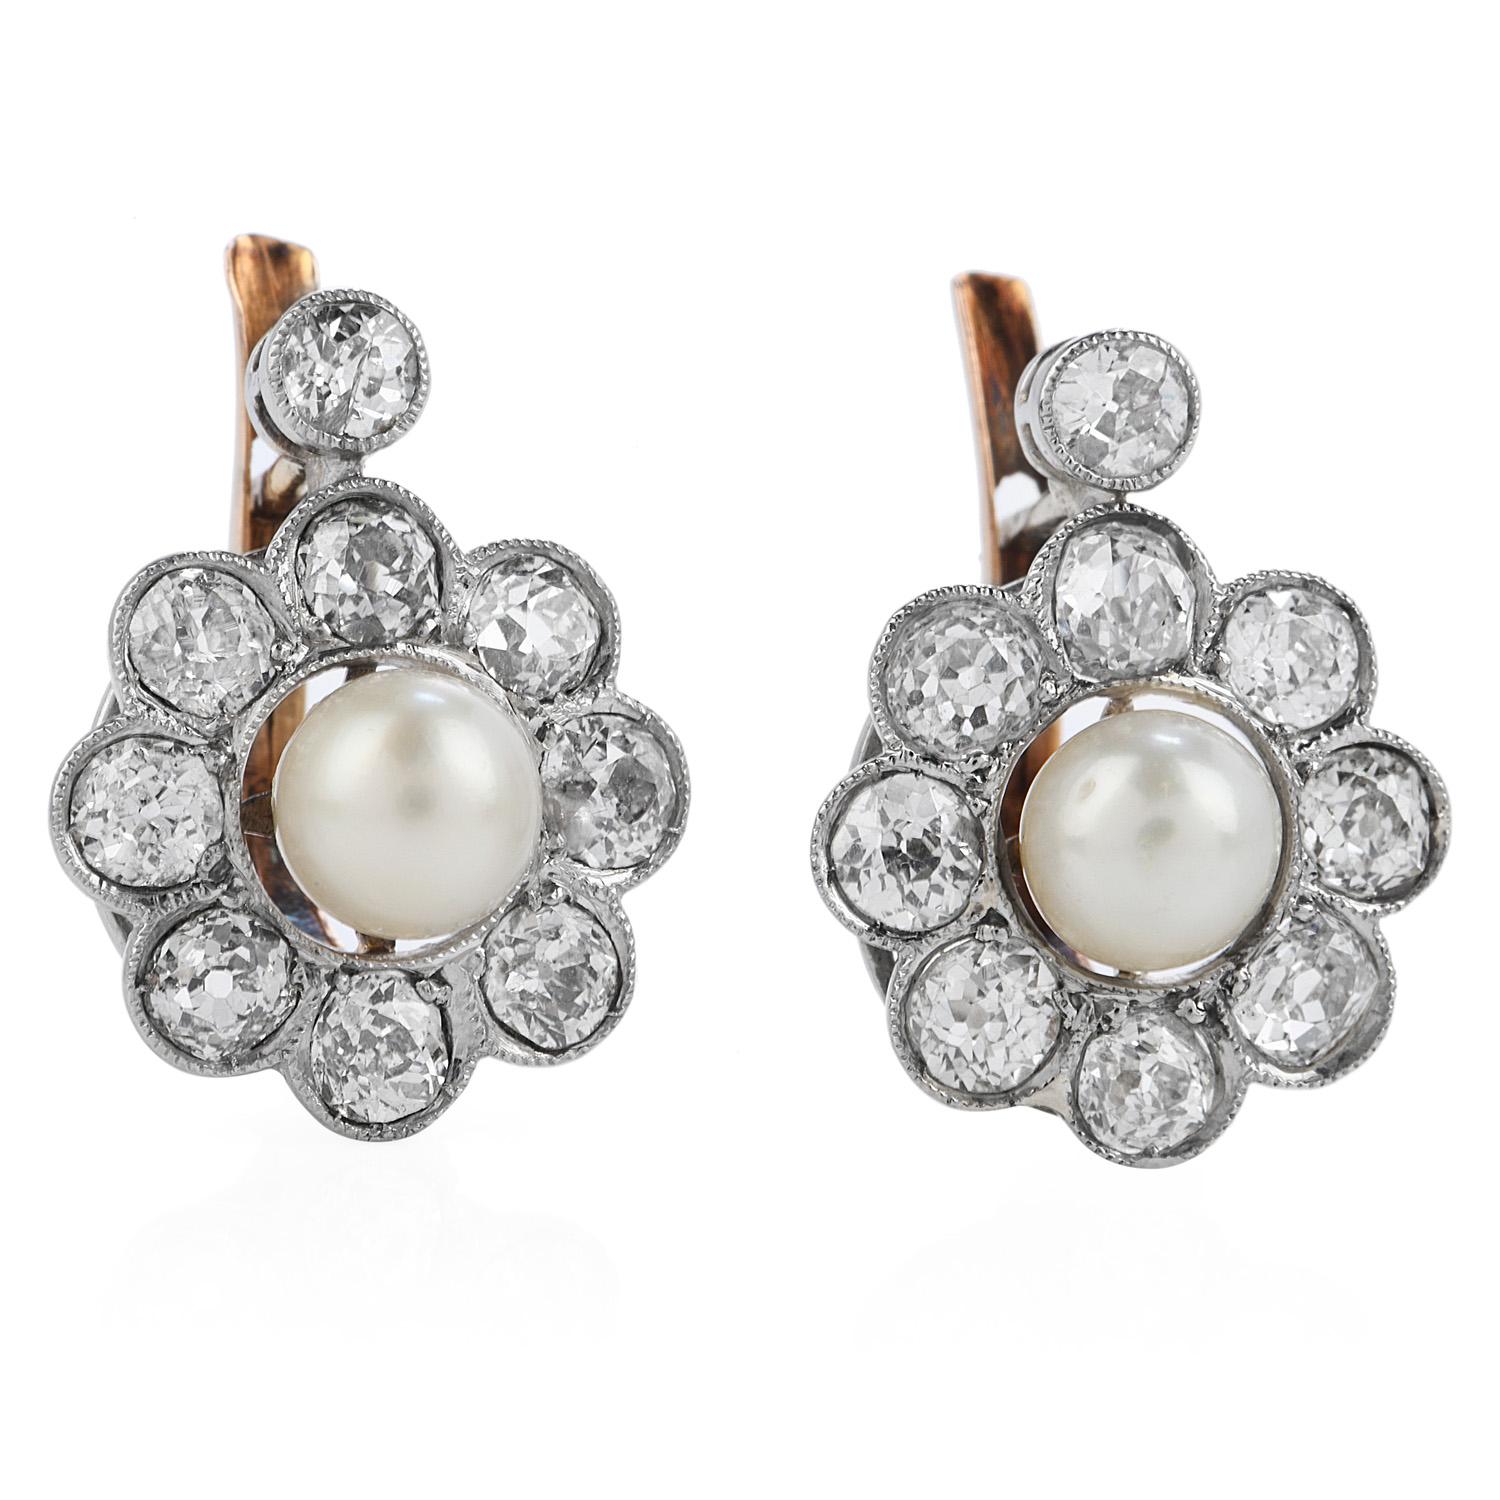 Antique 1940's two-tone floral-inspired dangle earrings,

Crafted in solid Platinum top & 18K yellow gold, topped by (18) Old-mine cut, bezel set Diamonds weighing approximately 1.90 carats (G-H) color and VS-SI clarity)

The center of each piece is